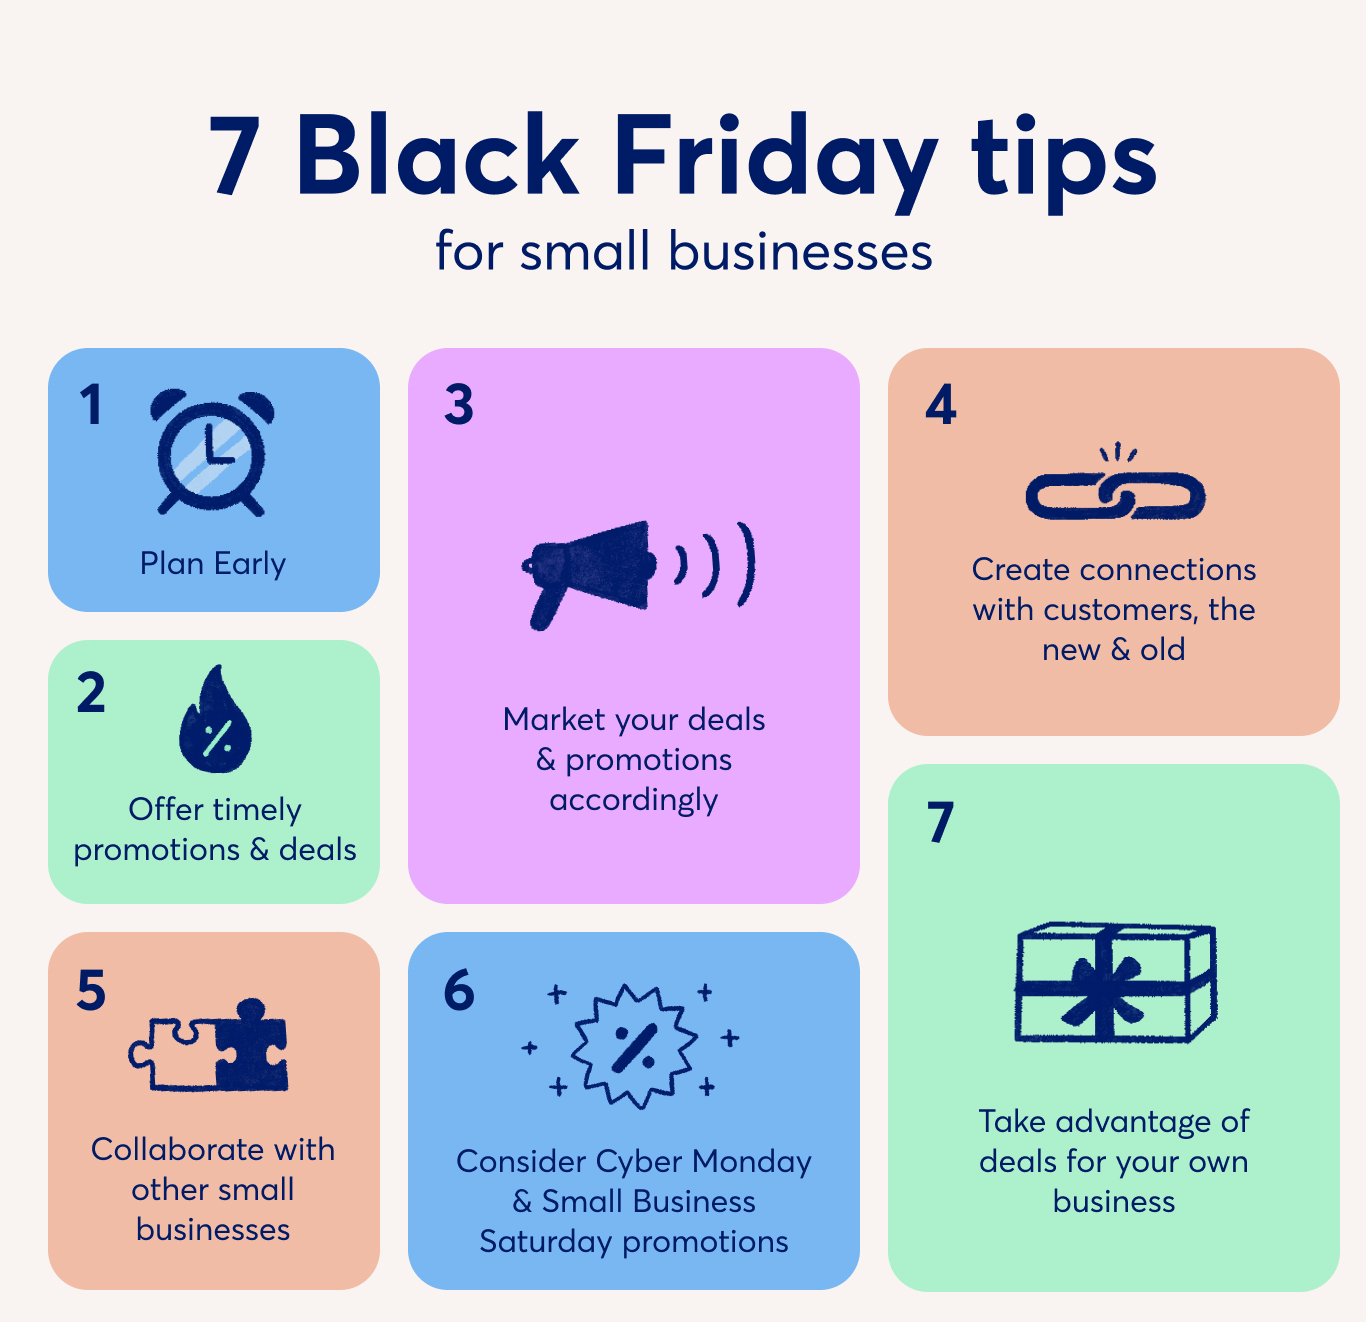 7 Black Friday tips for small businesses